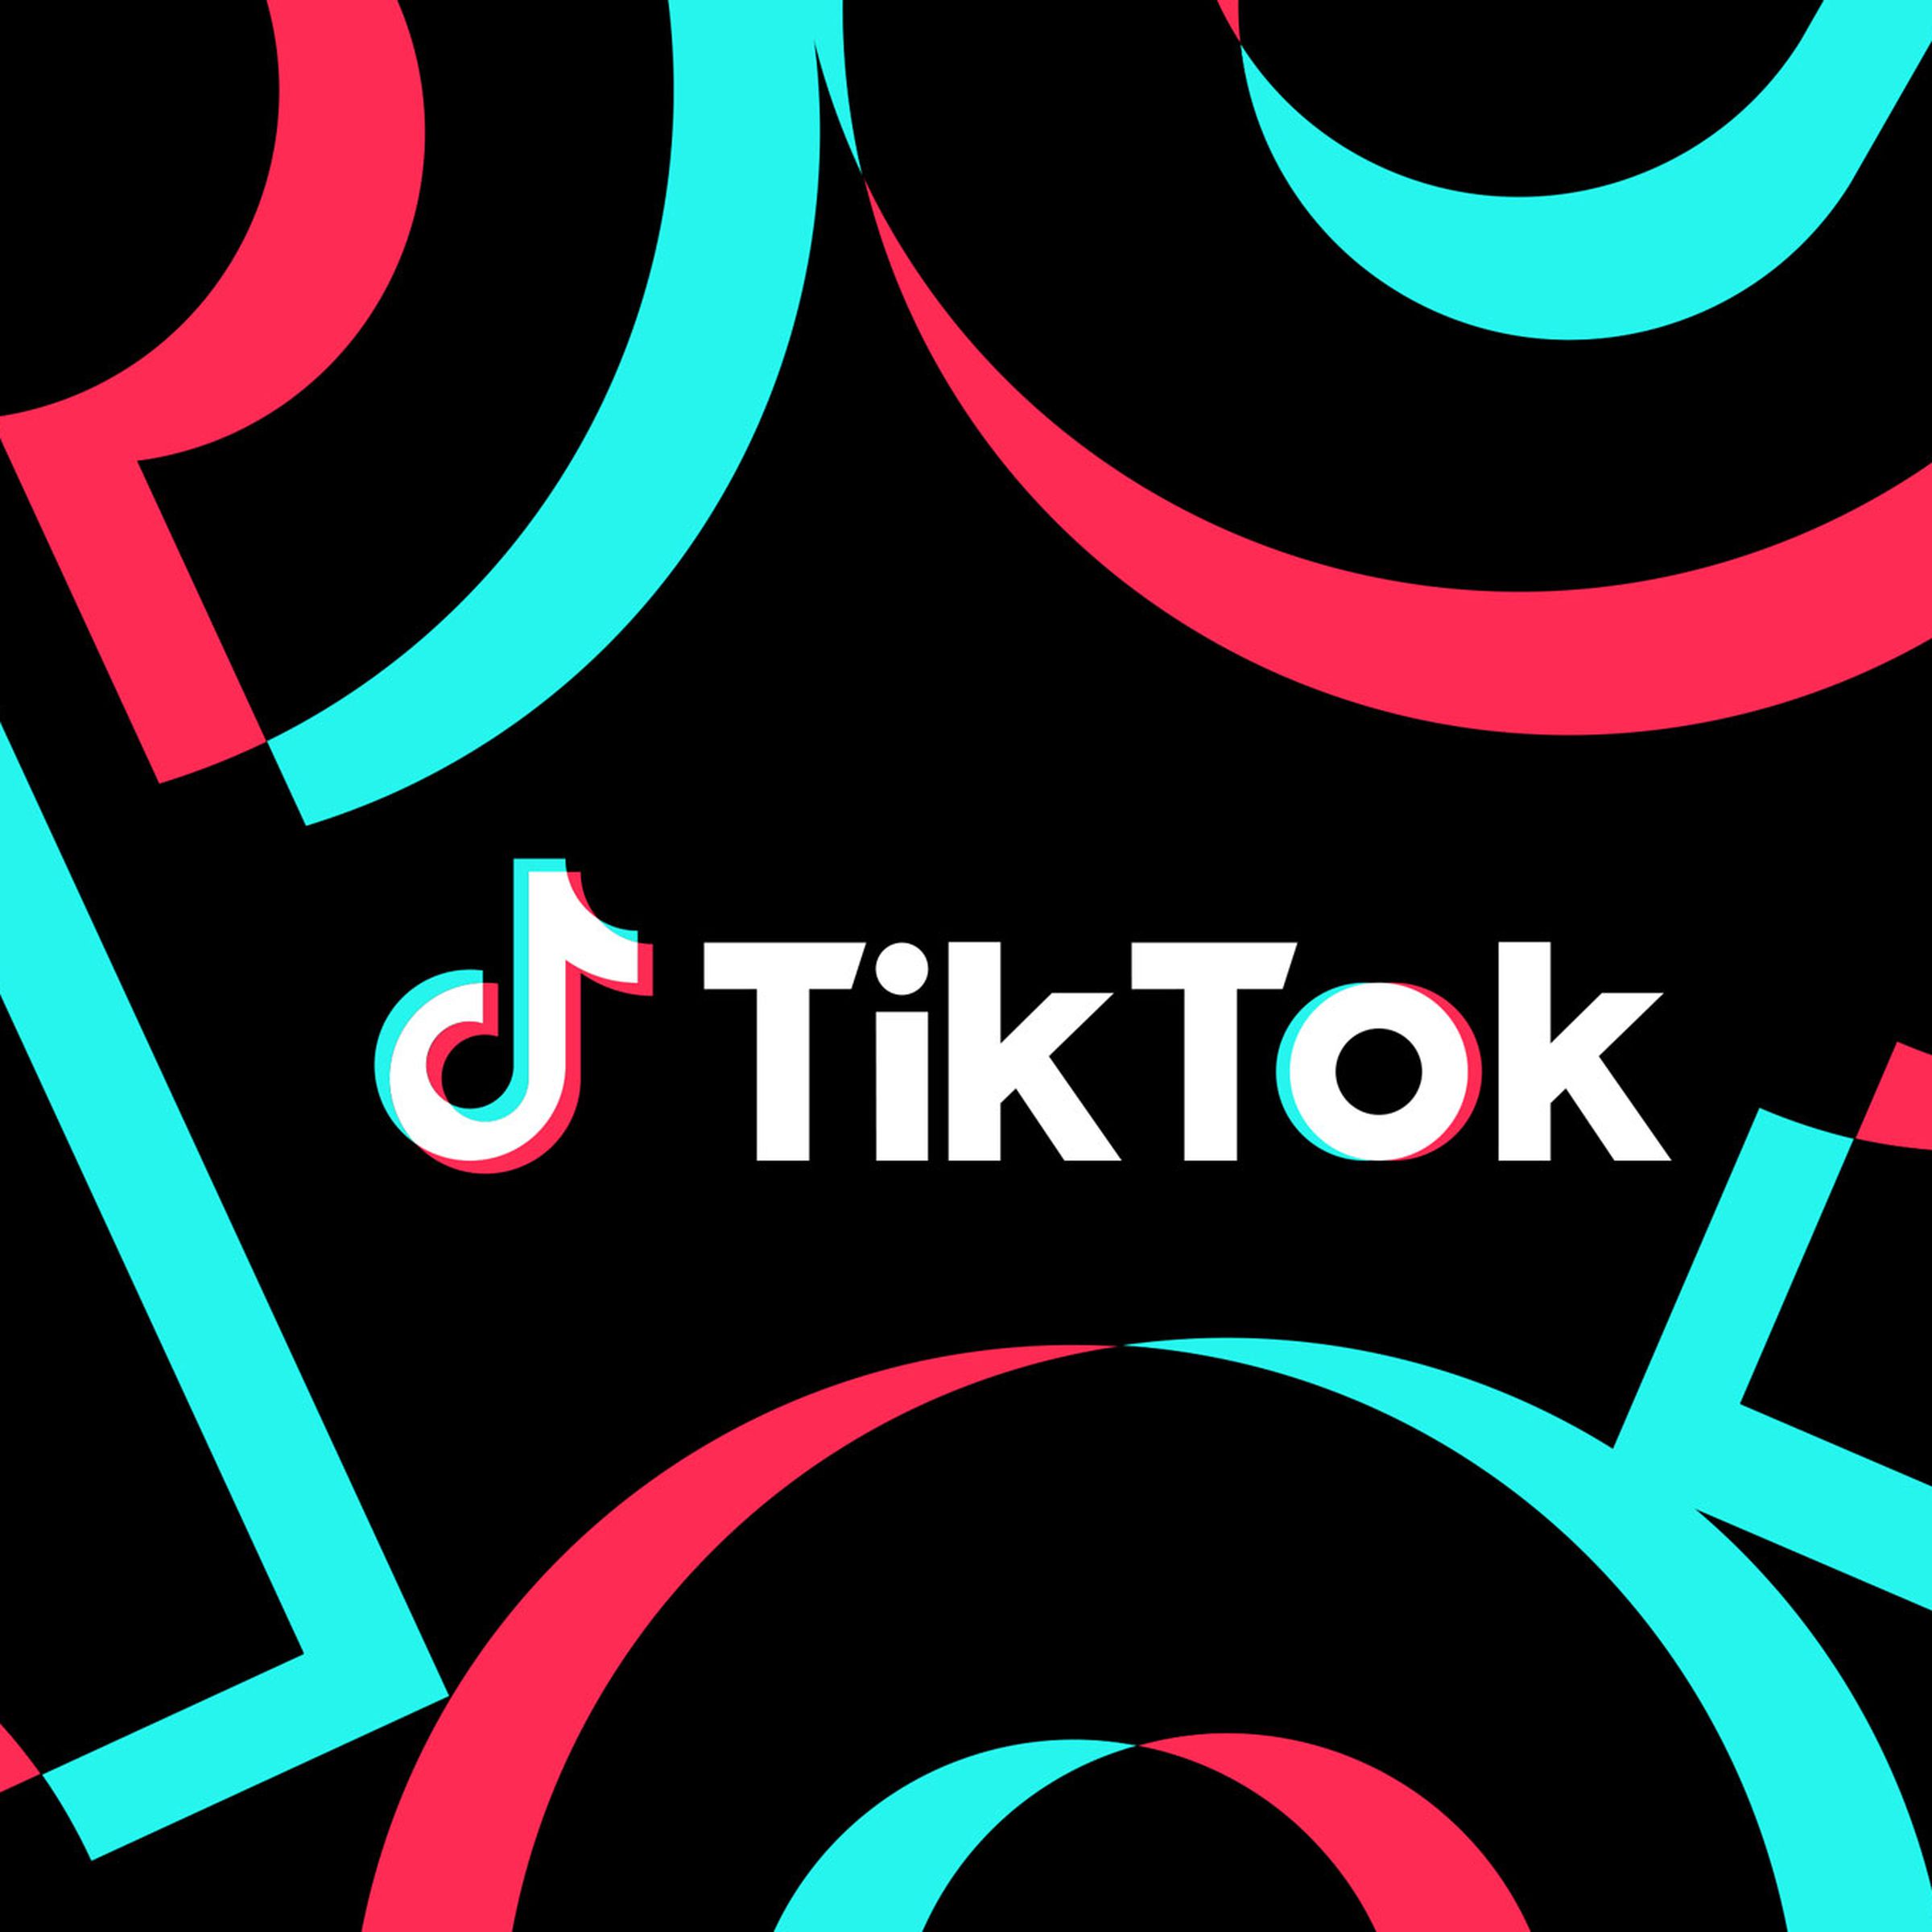 The TikTok logo surrounded by red and letters from the word “TikTok”